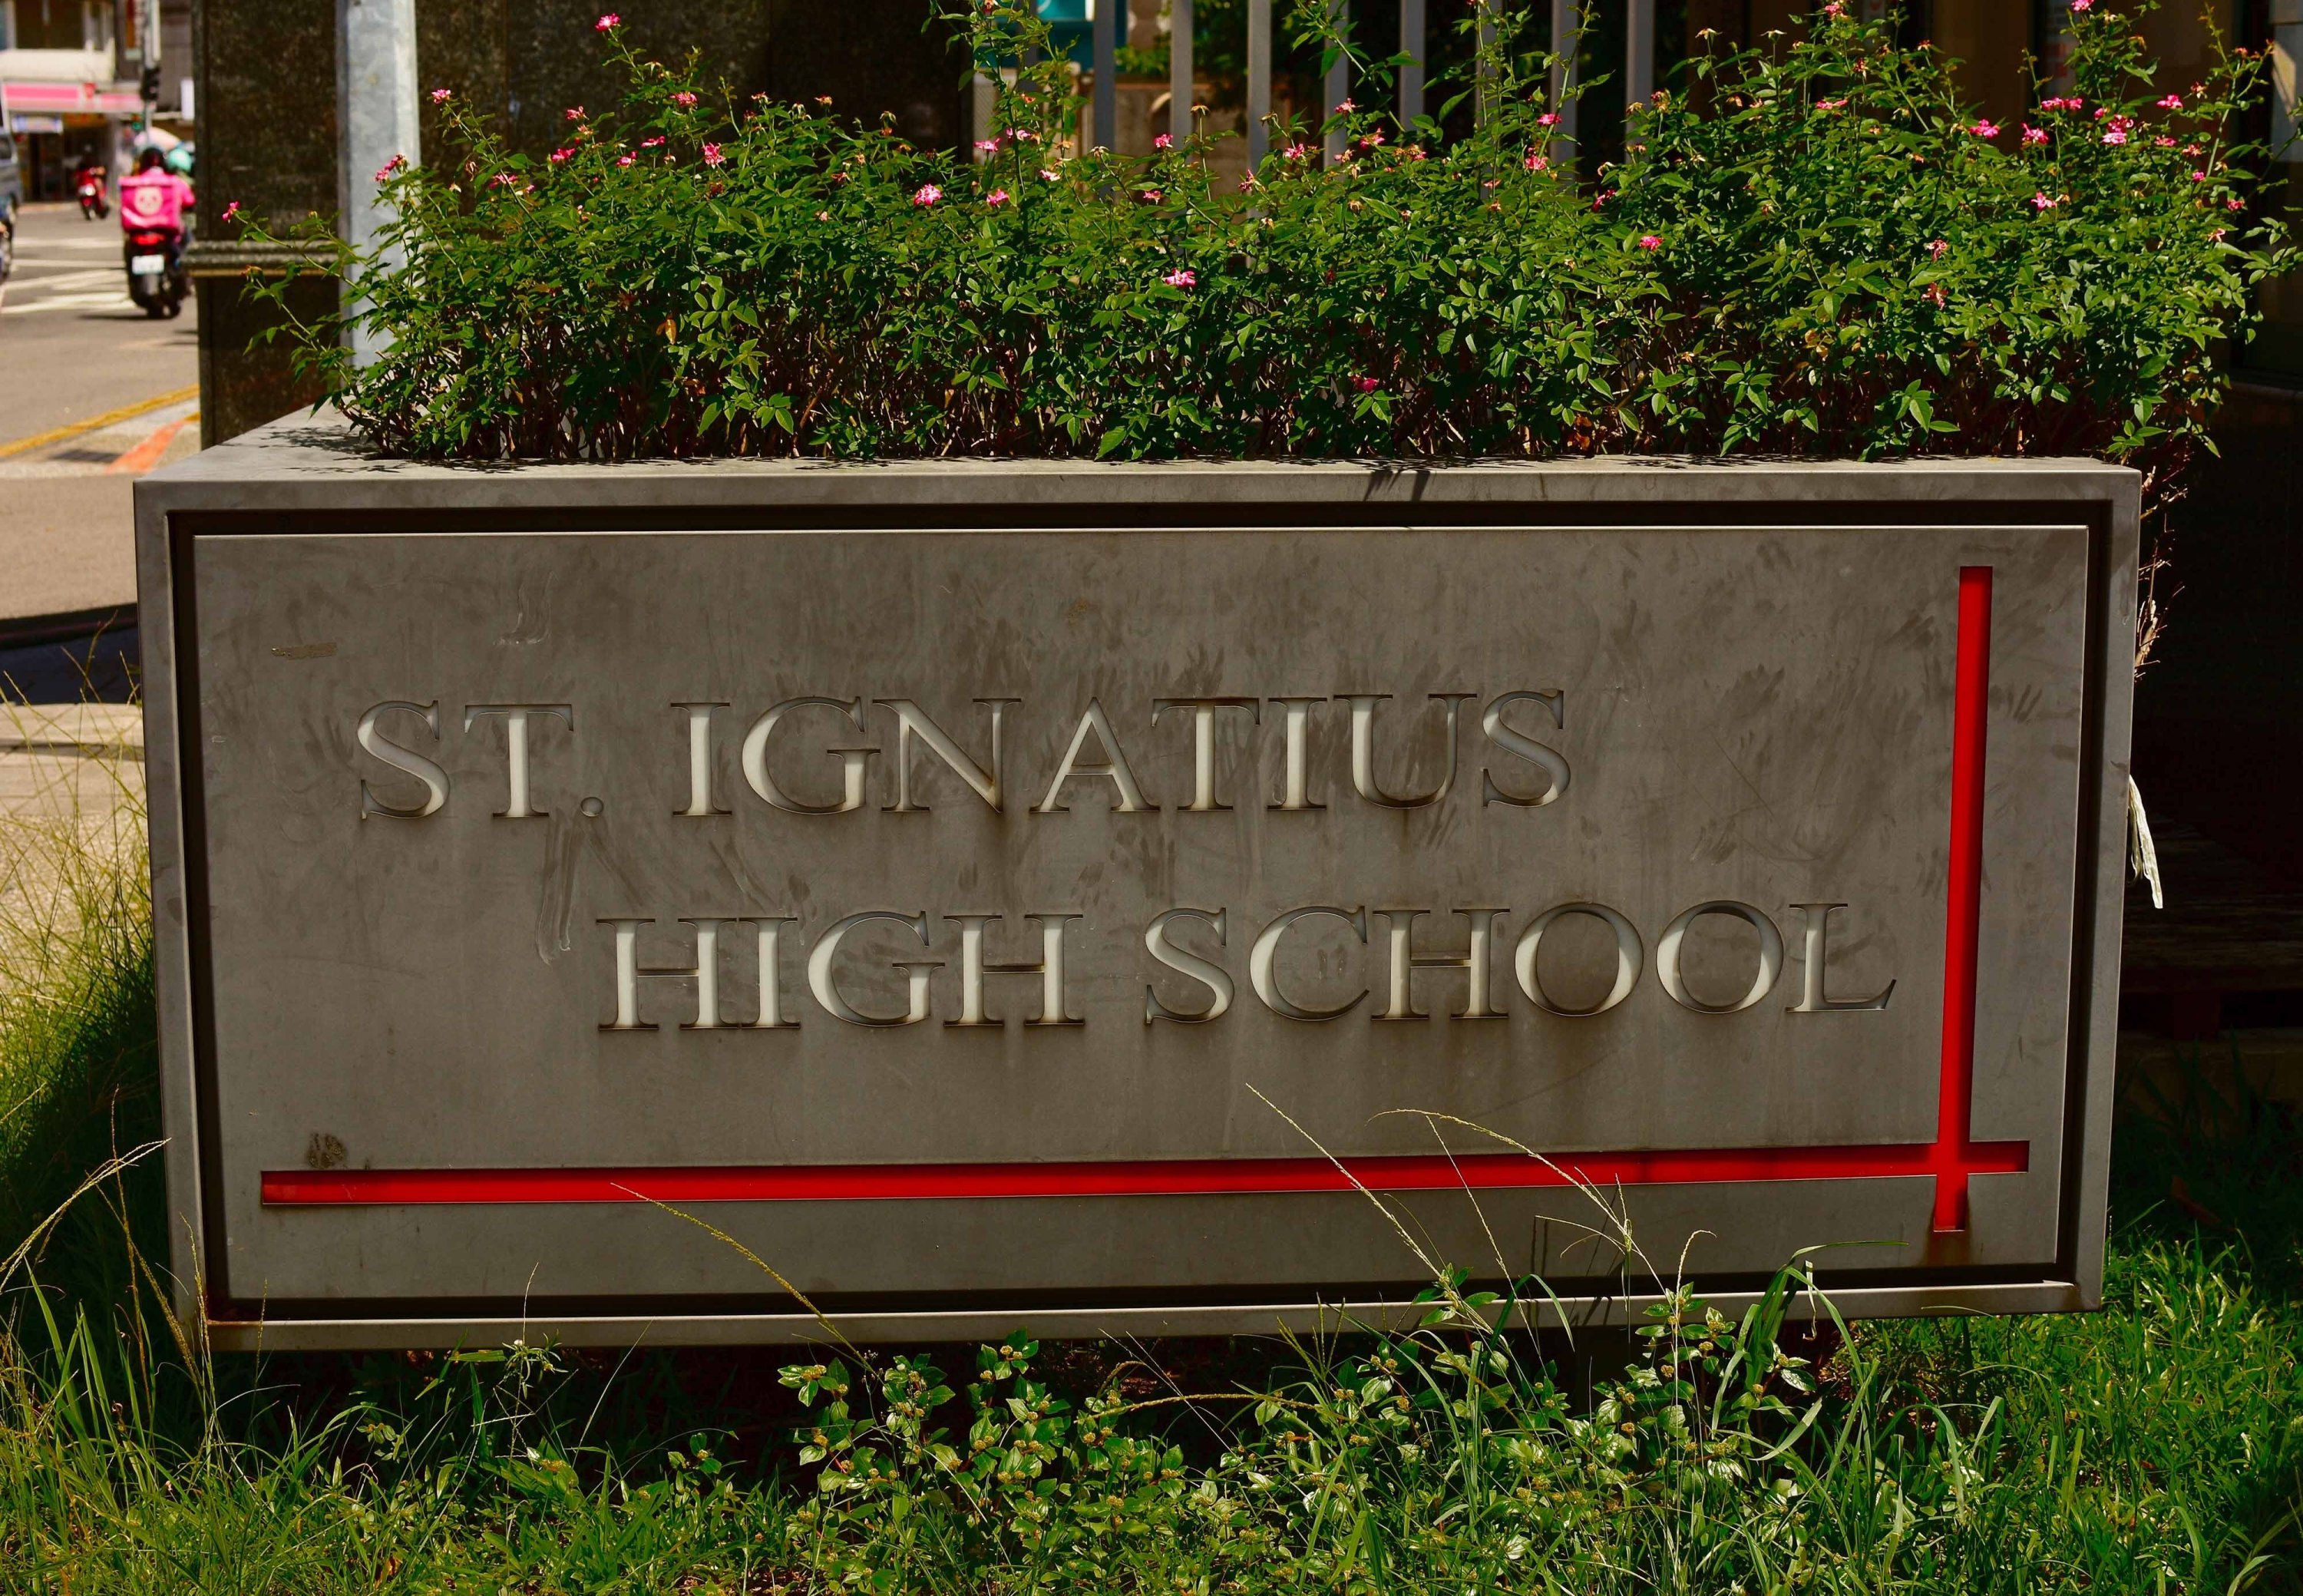 A sign of St. Ignatius High School in Taiwan, Aug. 31, 2020. (Shutterstock) 